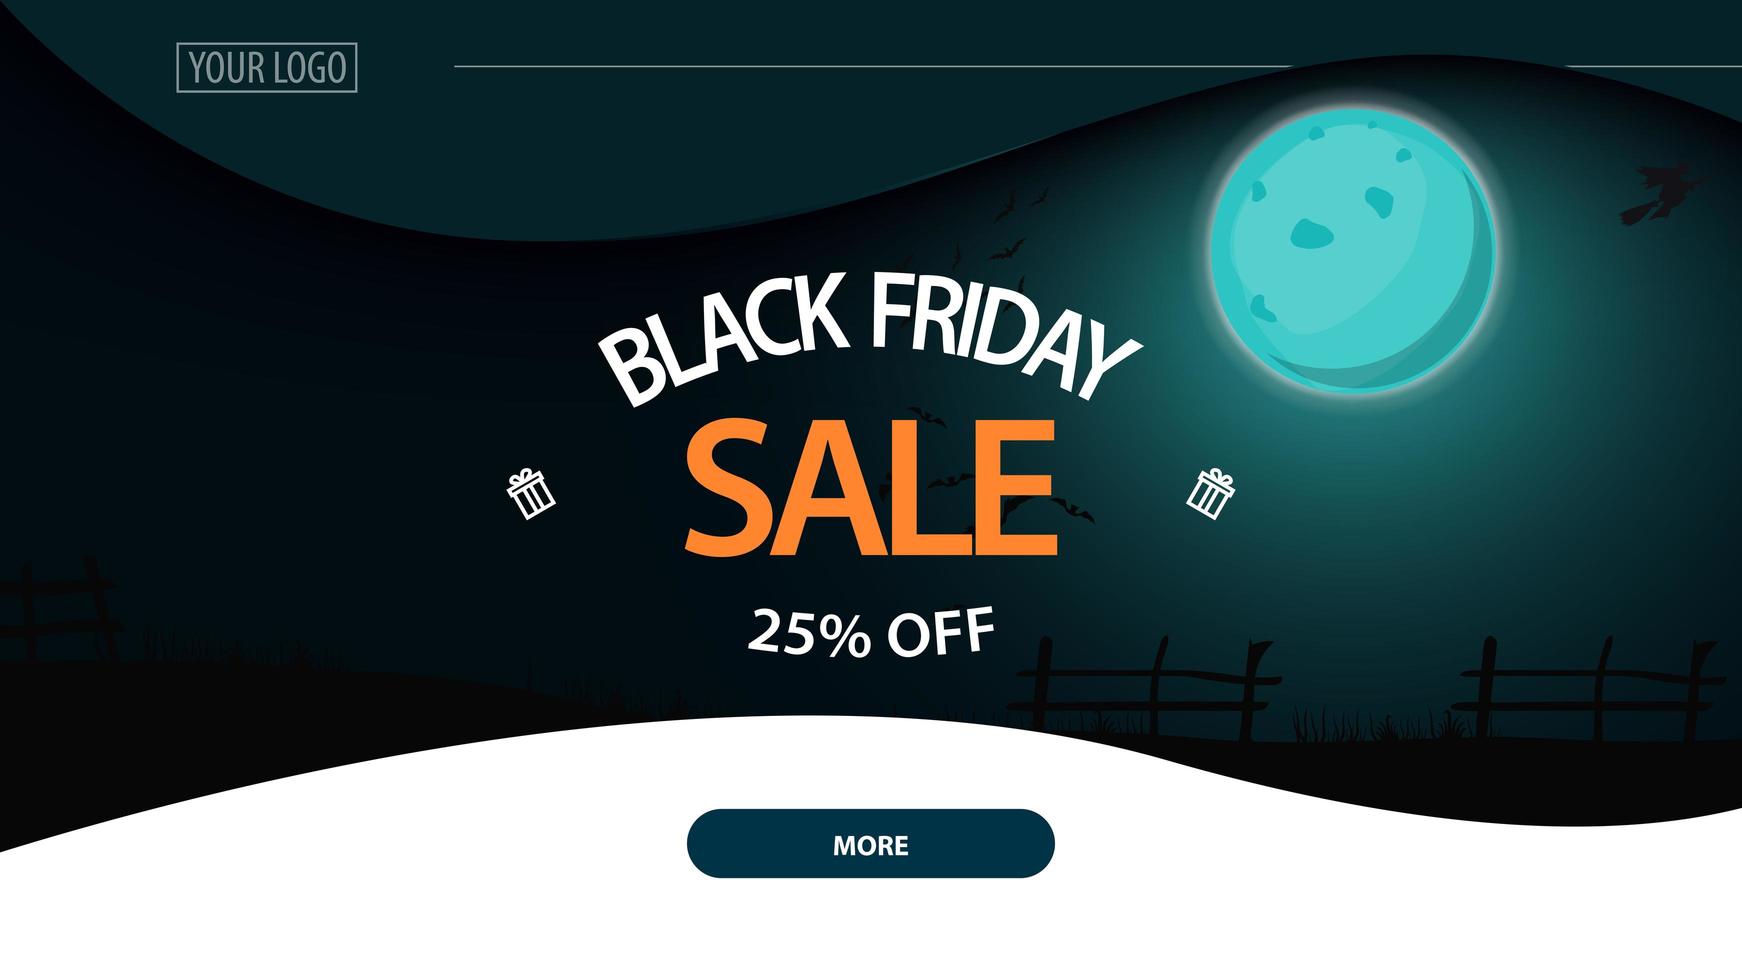 Black Friday sale, up to 25 off, horizontal discount banner with night landscape on background vector